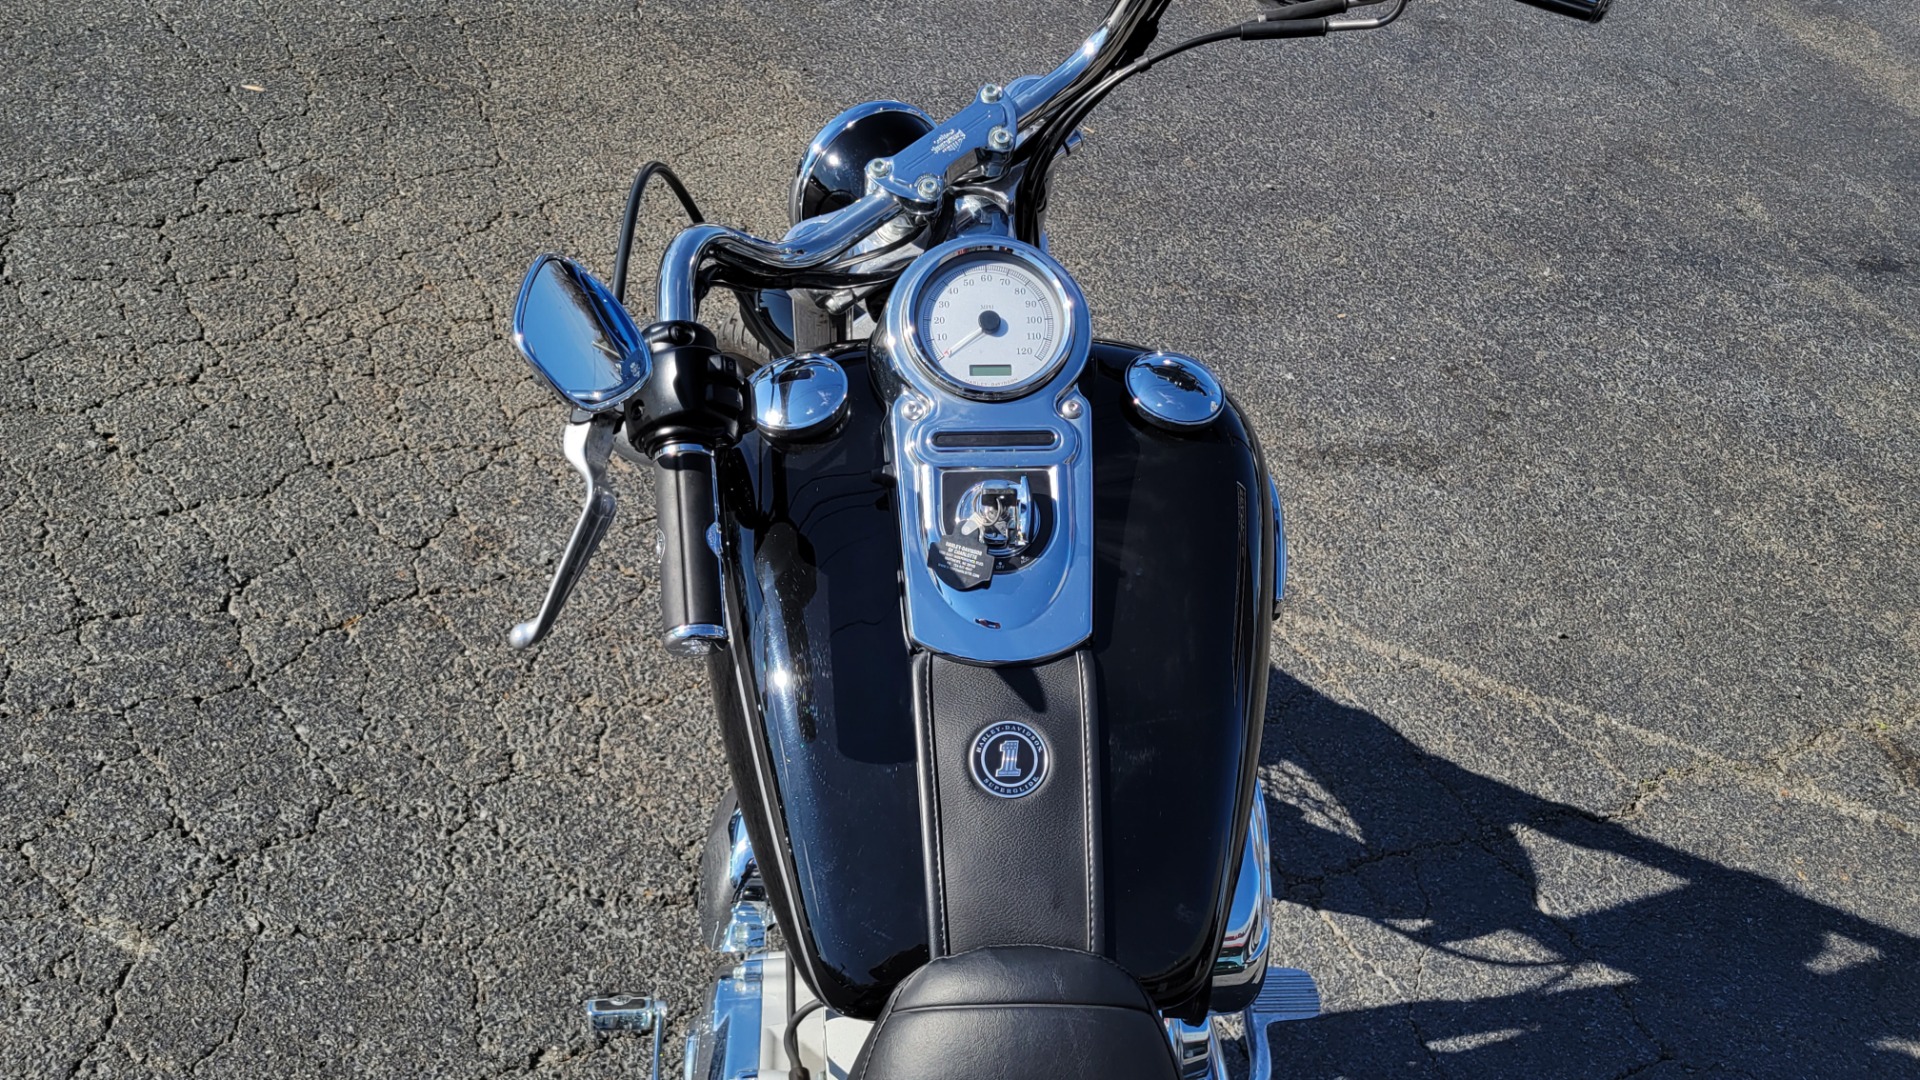 Used 2007 Harley Davidson SUPER GLIDE 1600CC / DYNA GLIDE / LOTS OF CHROME / ONLY 45 MILES for sale Sold at Formula Imports in Charlotte NC 28227 3